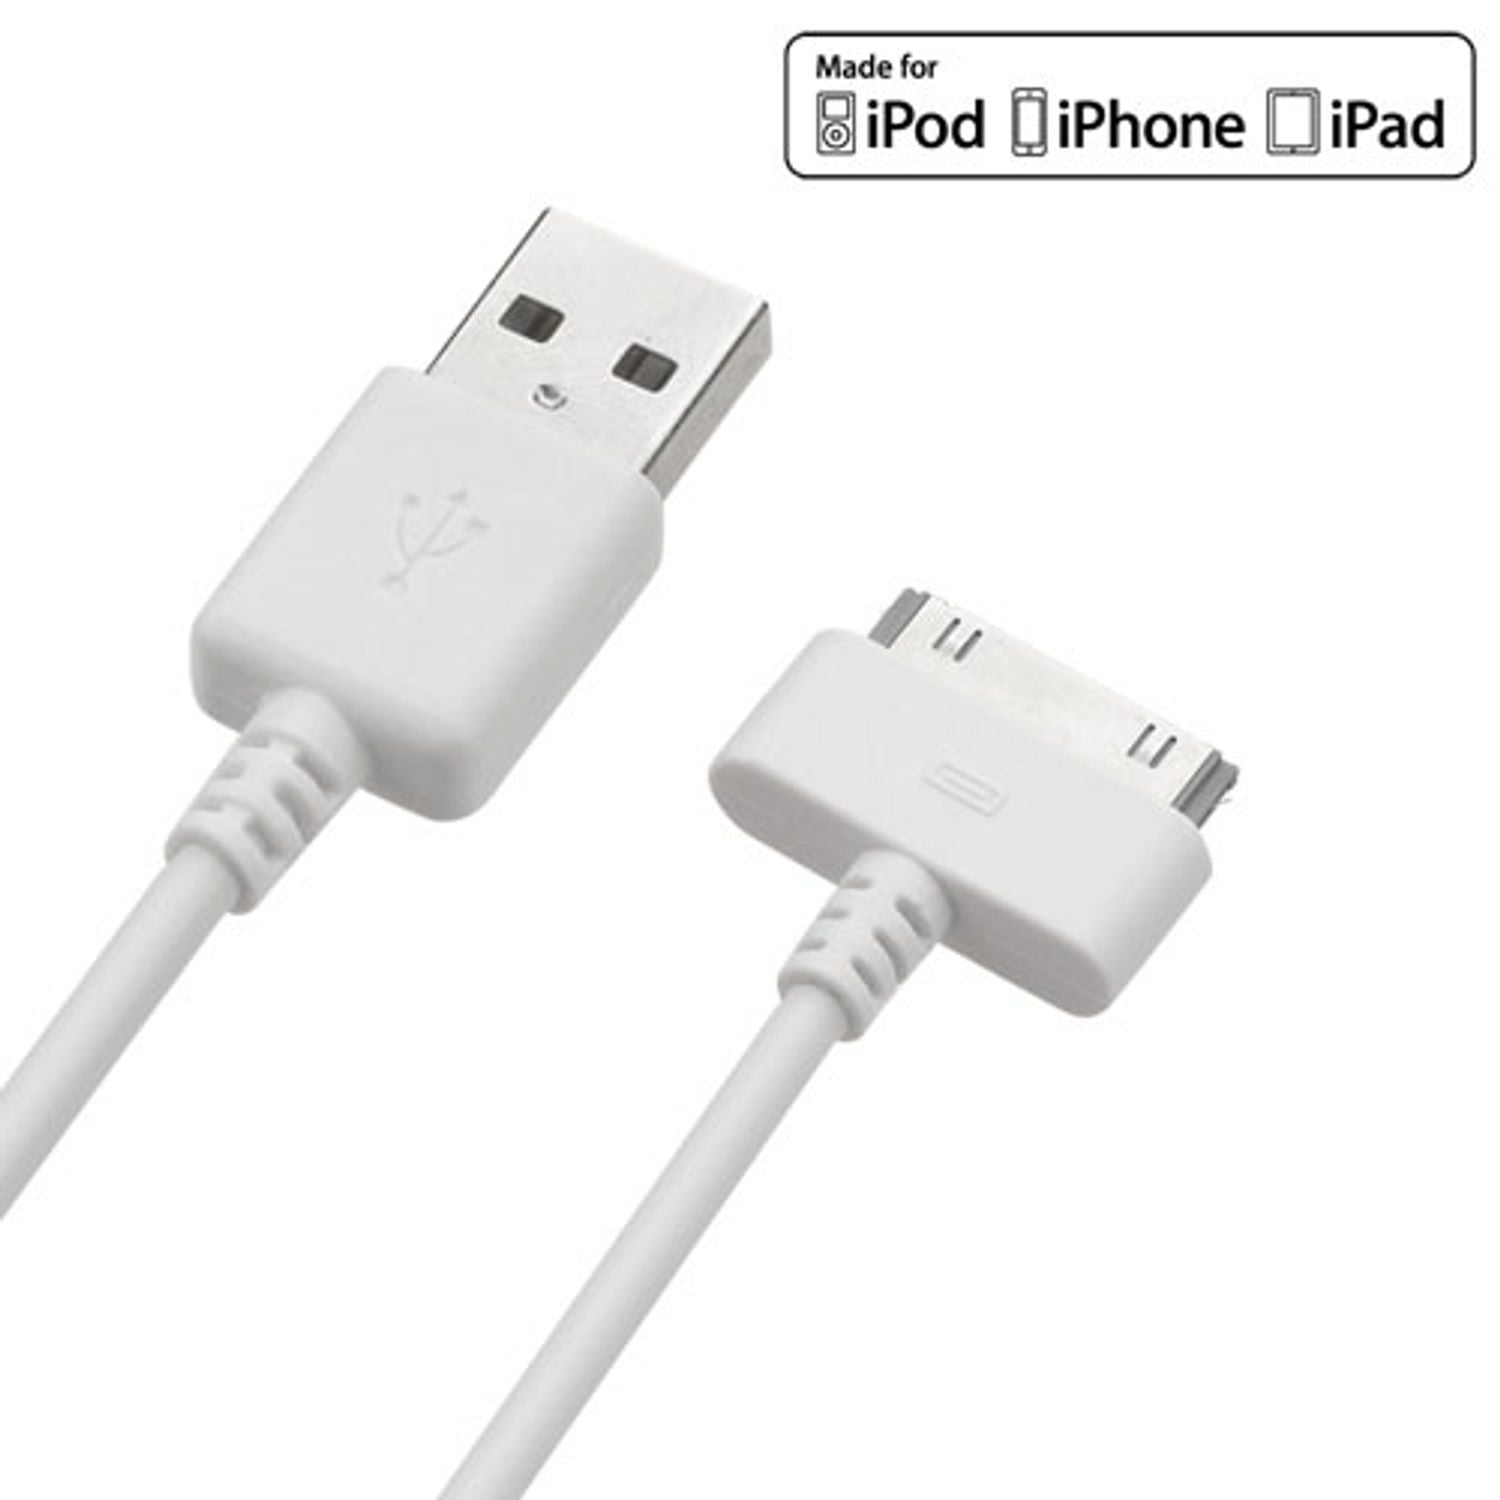 3 USB SYNC CHARGER CABLE IPHONE IPOD TOUCH CLASSIC IPAD 